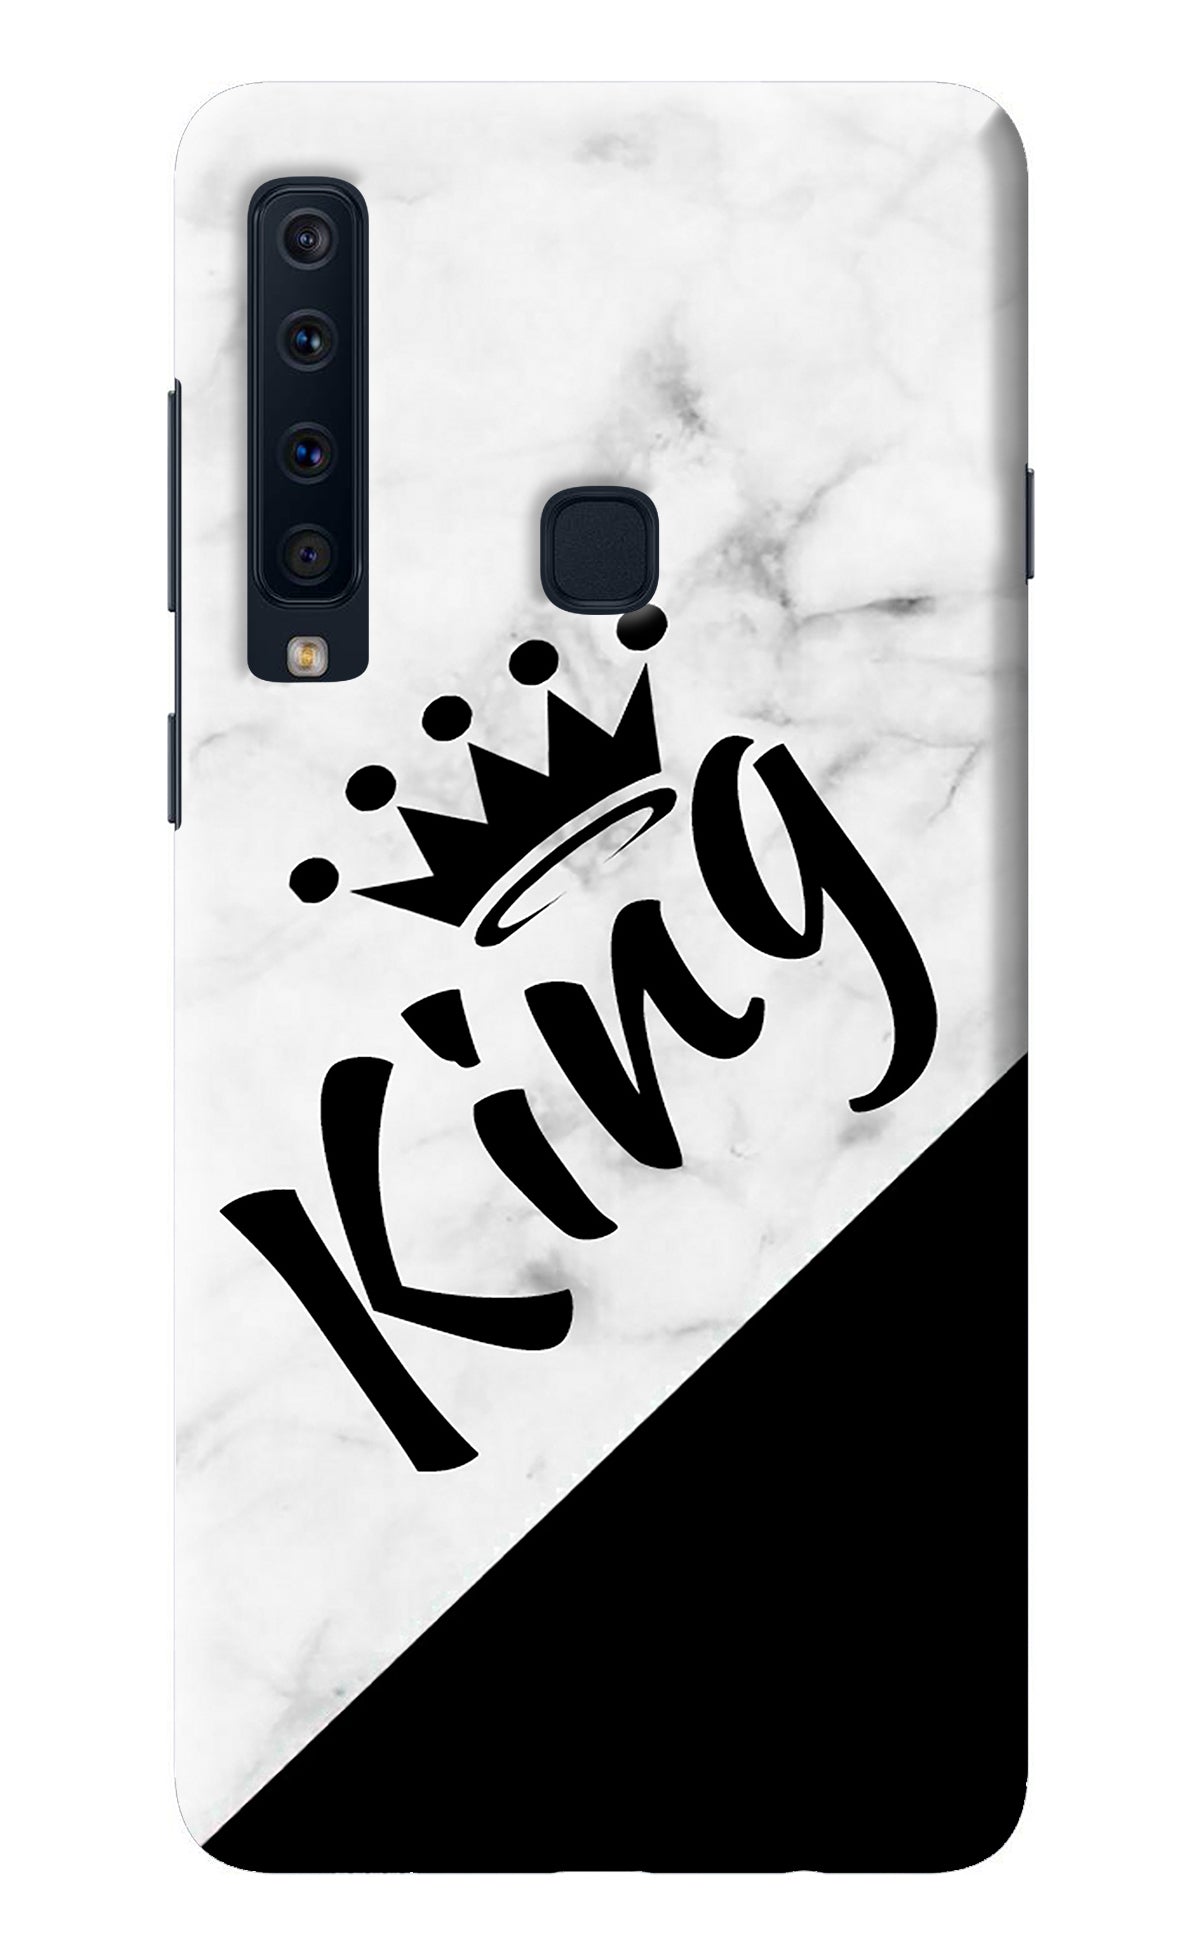 King Samsung A9 Back Cover